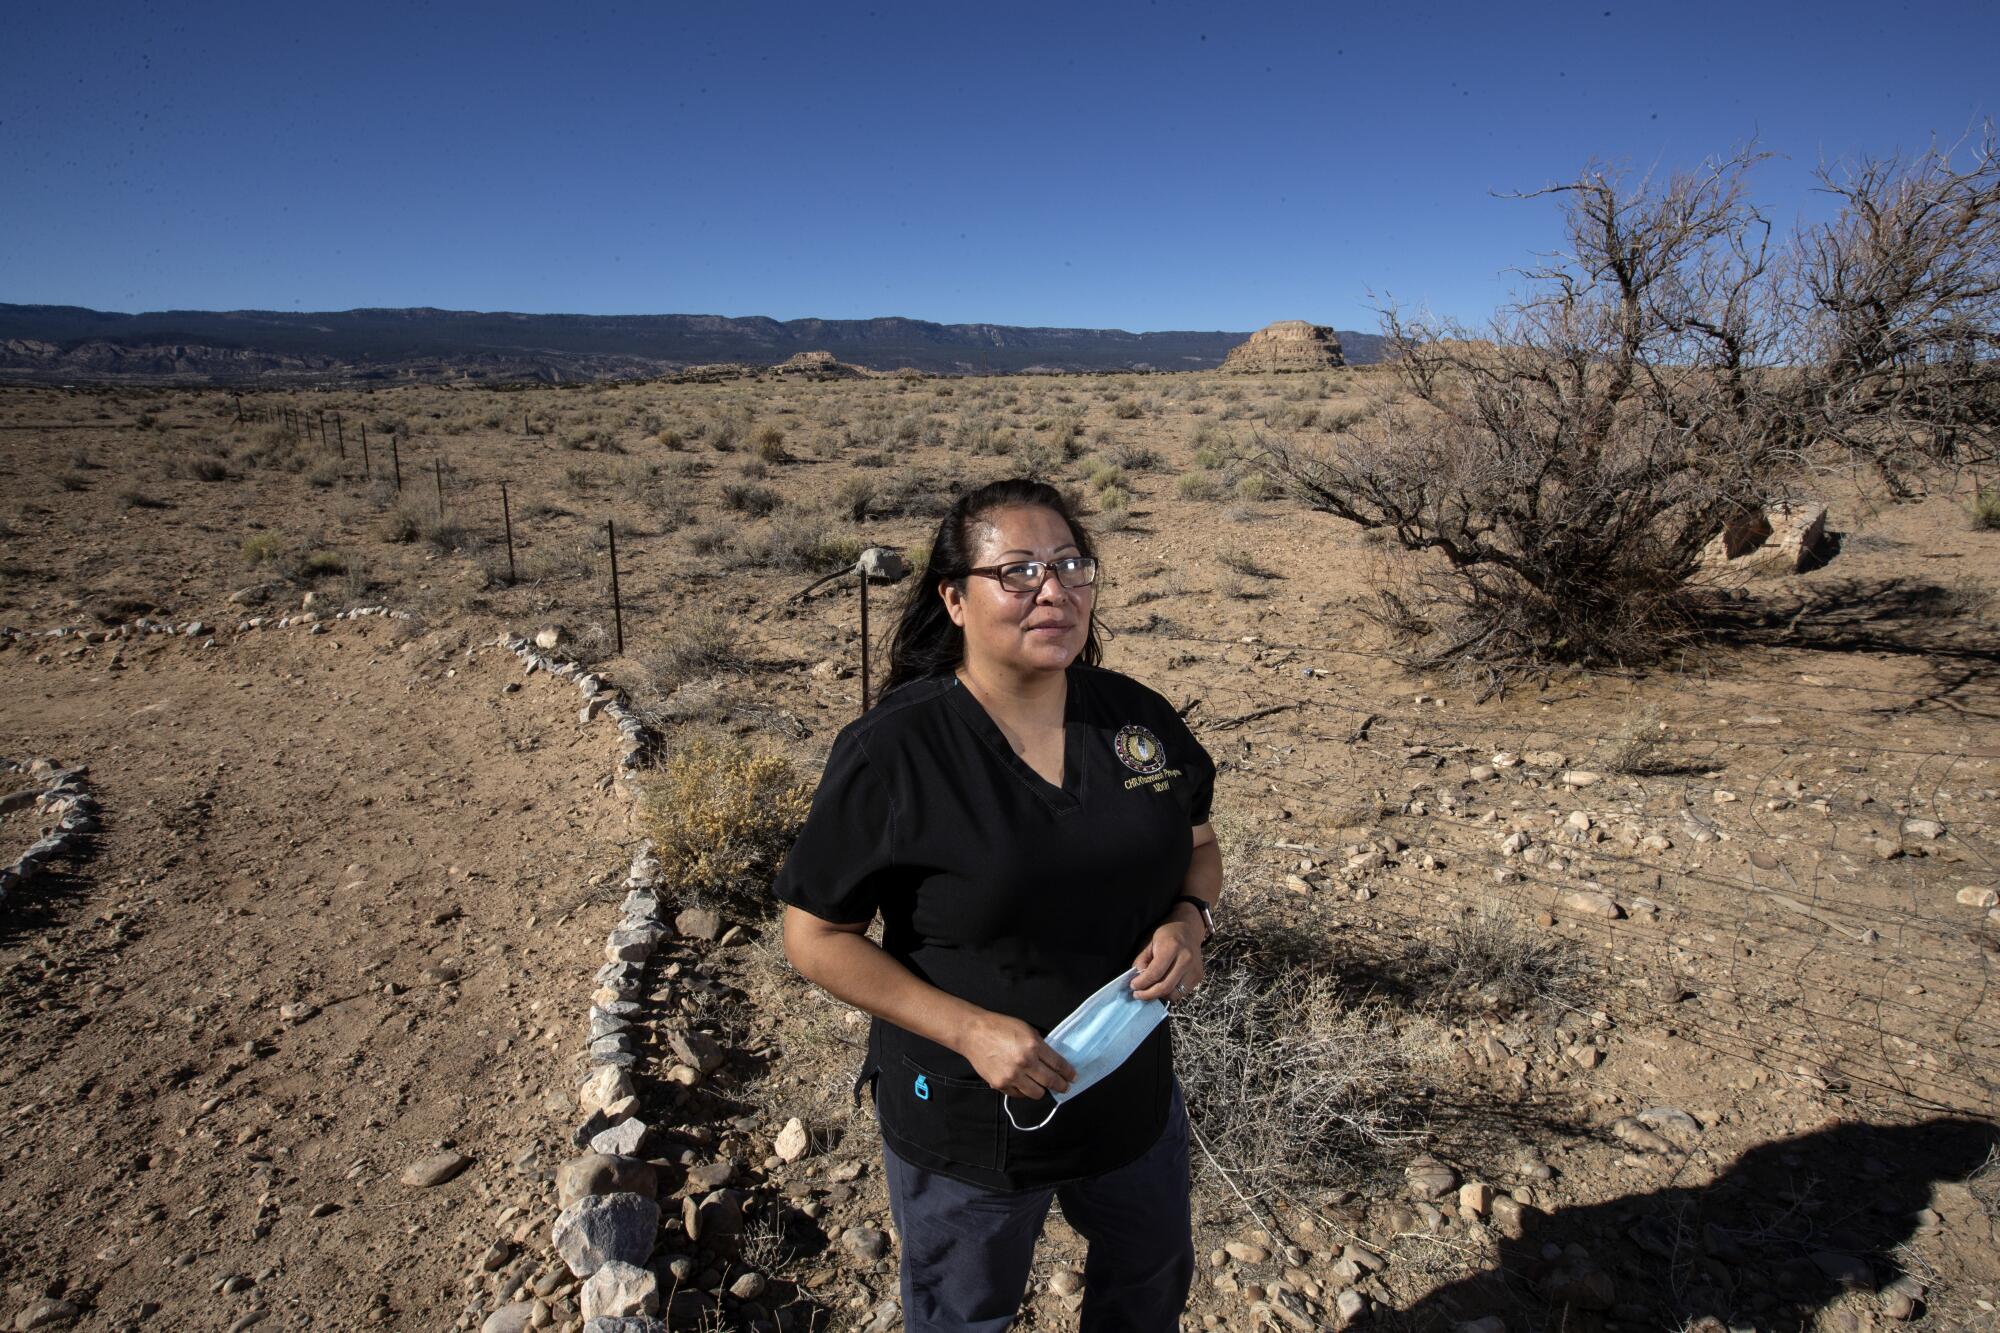 Marlene Montoya stands near a dirt road with open land in the background.